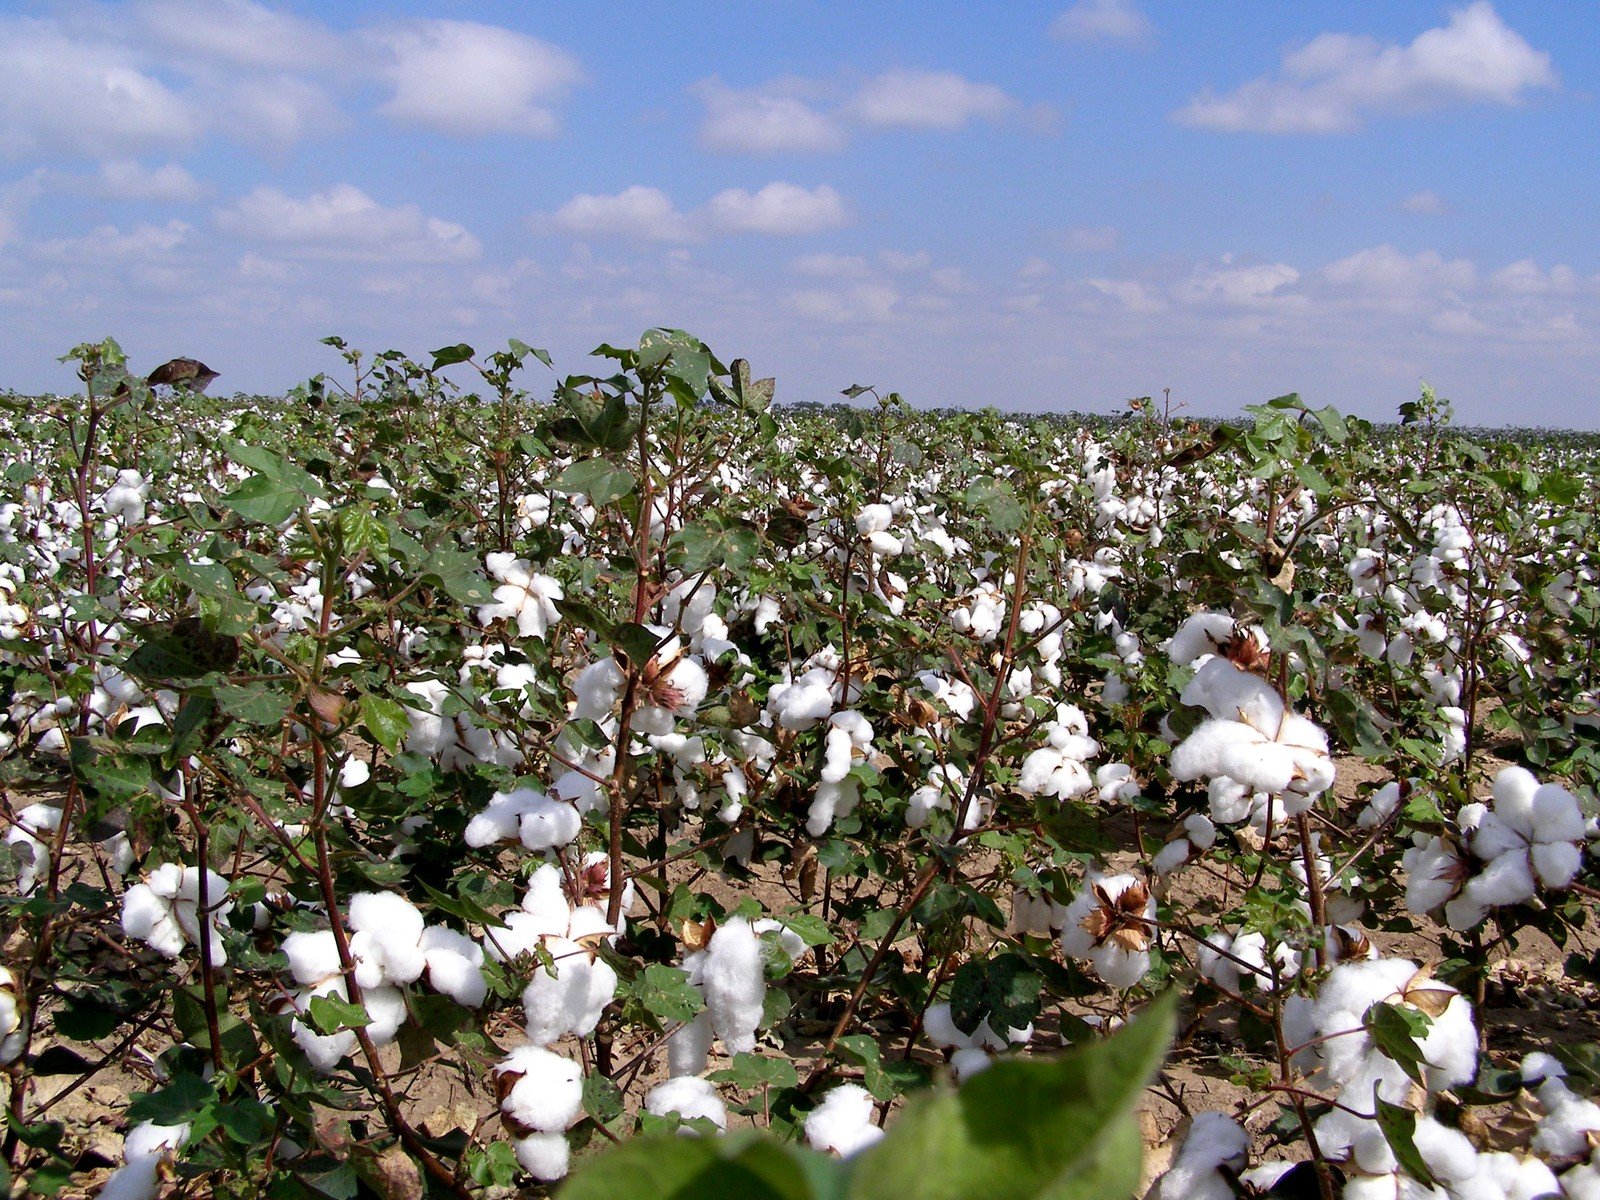 cotton in a field under blue sky with clouds